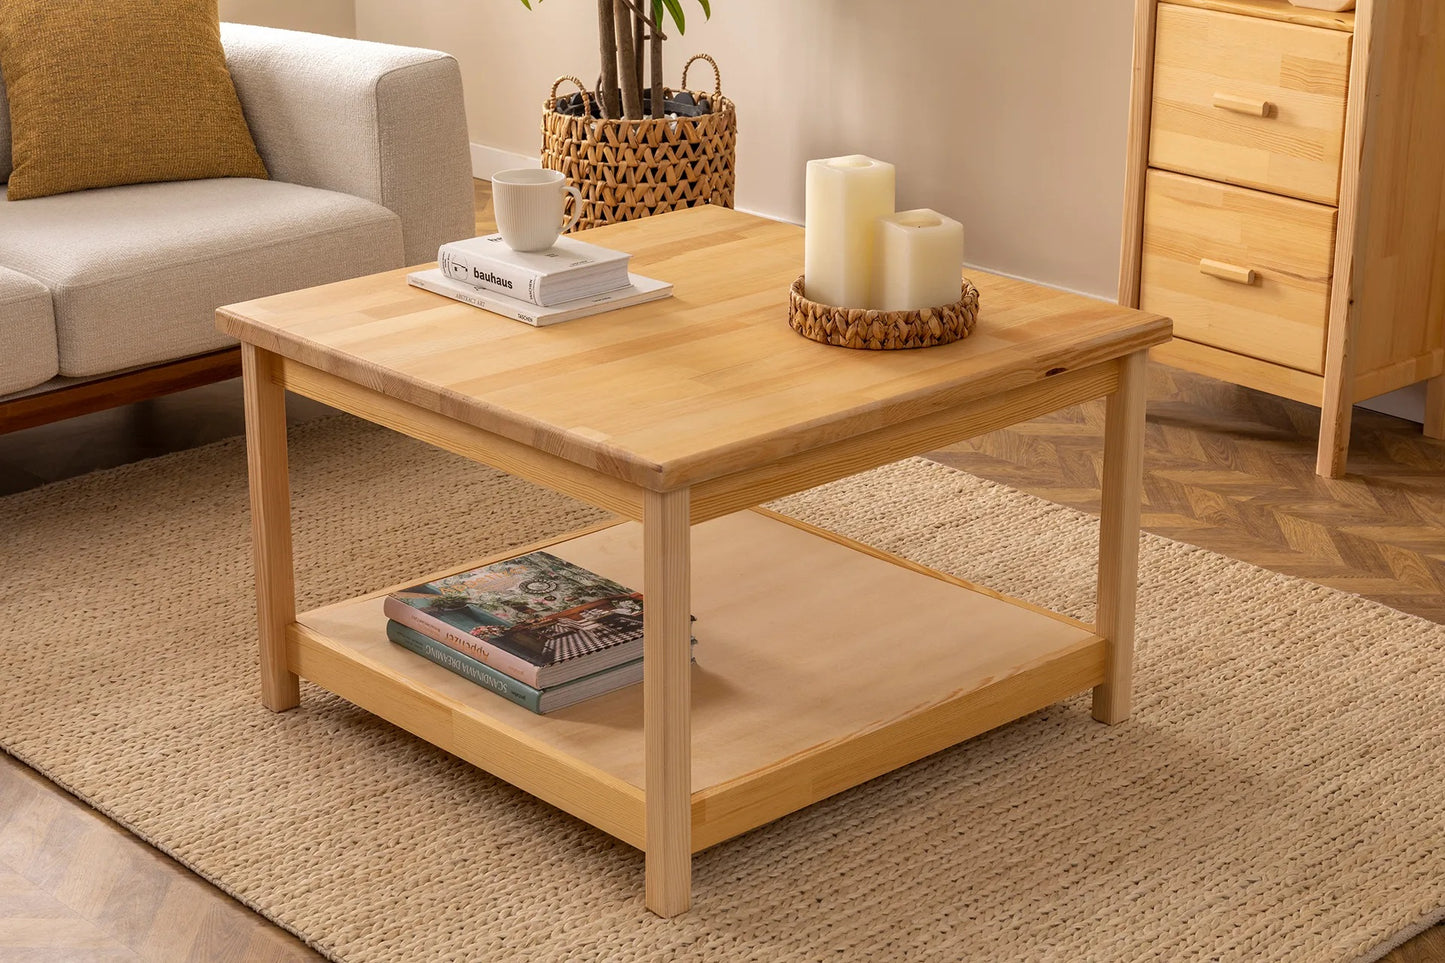 Solid Pine Wood Handmade Coffee Table with Storage Shelf for Living Room, Home & Office Dawn